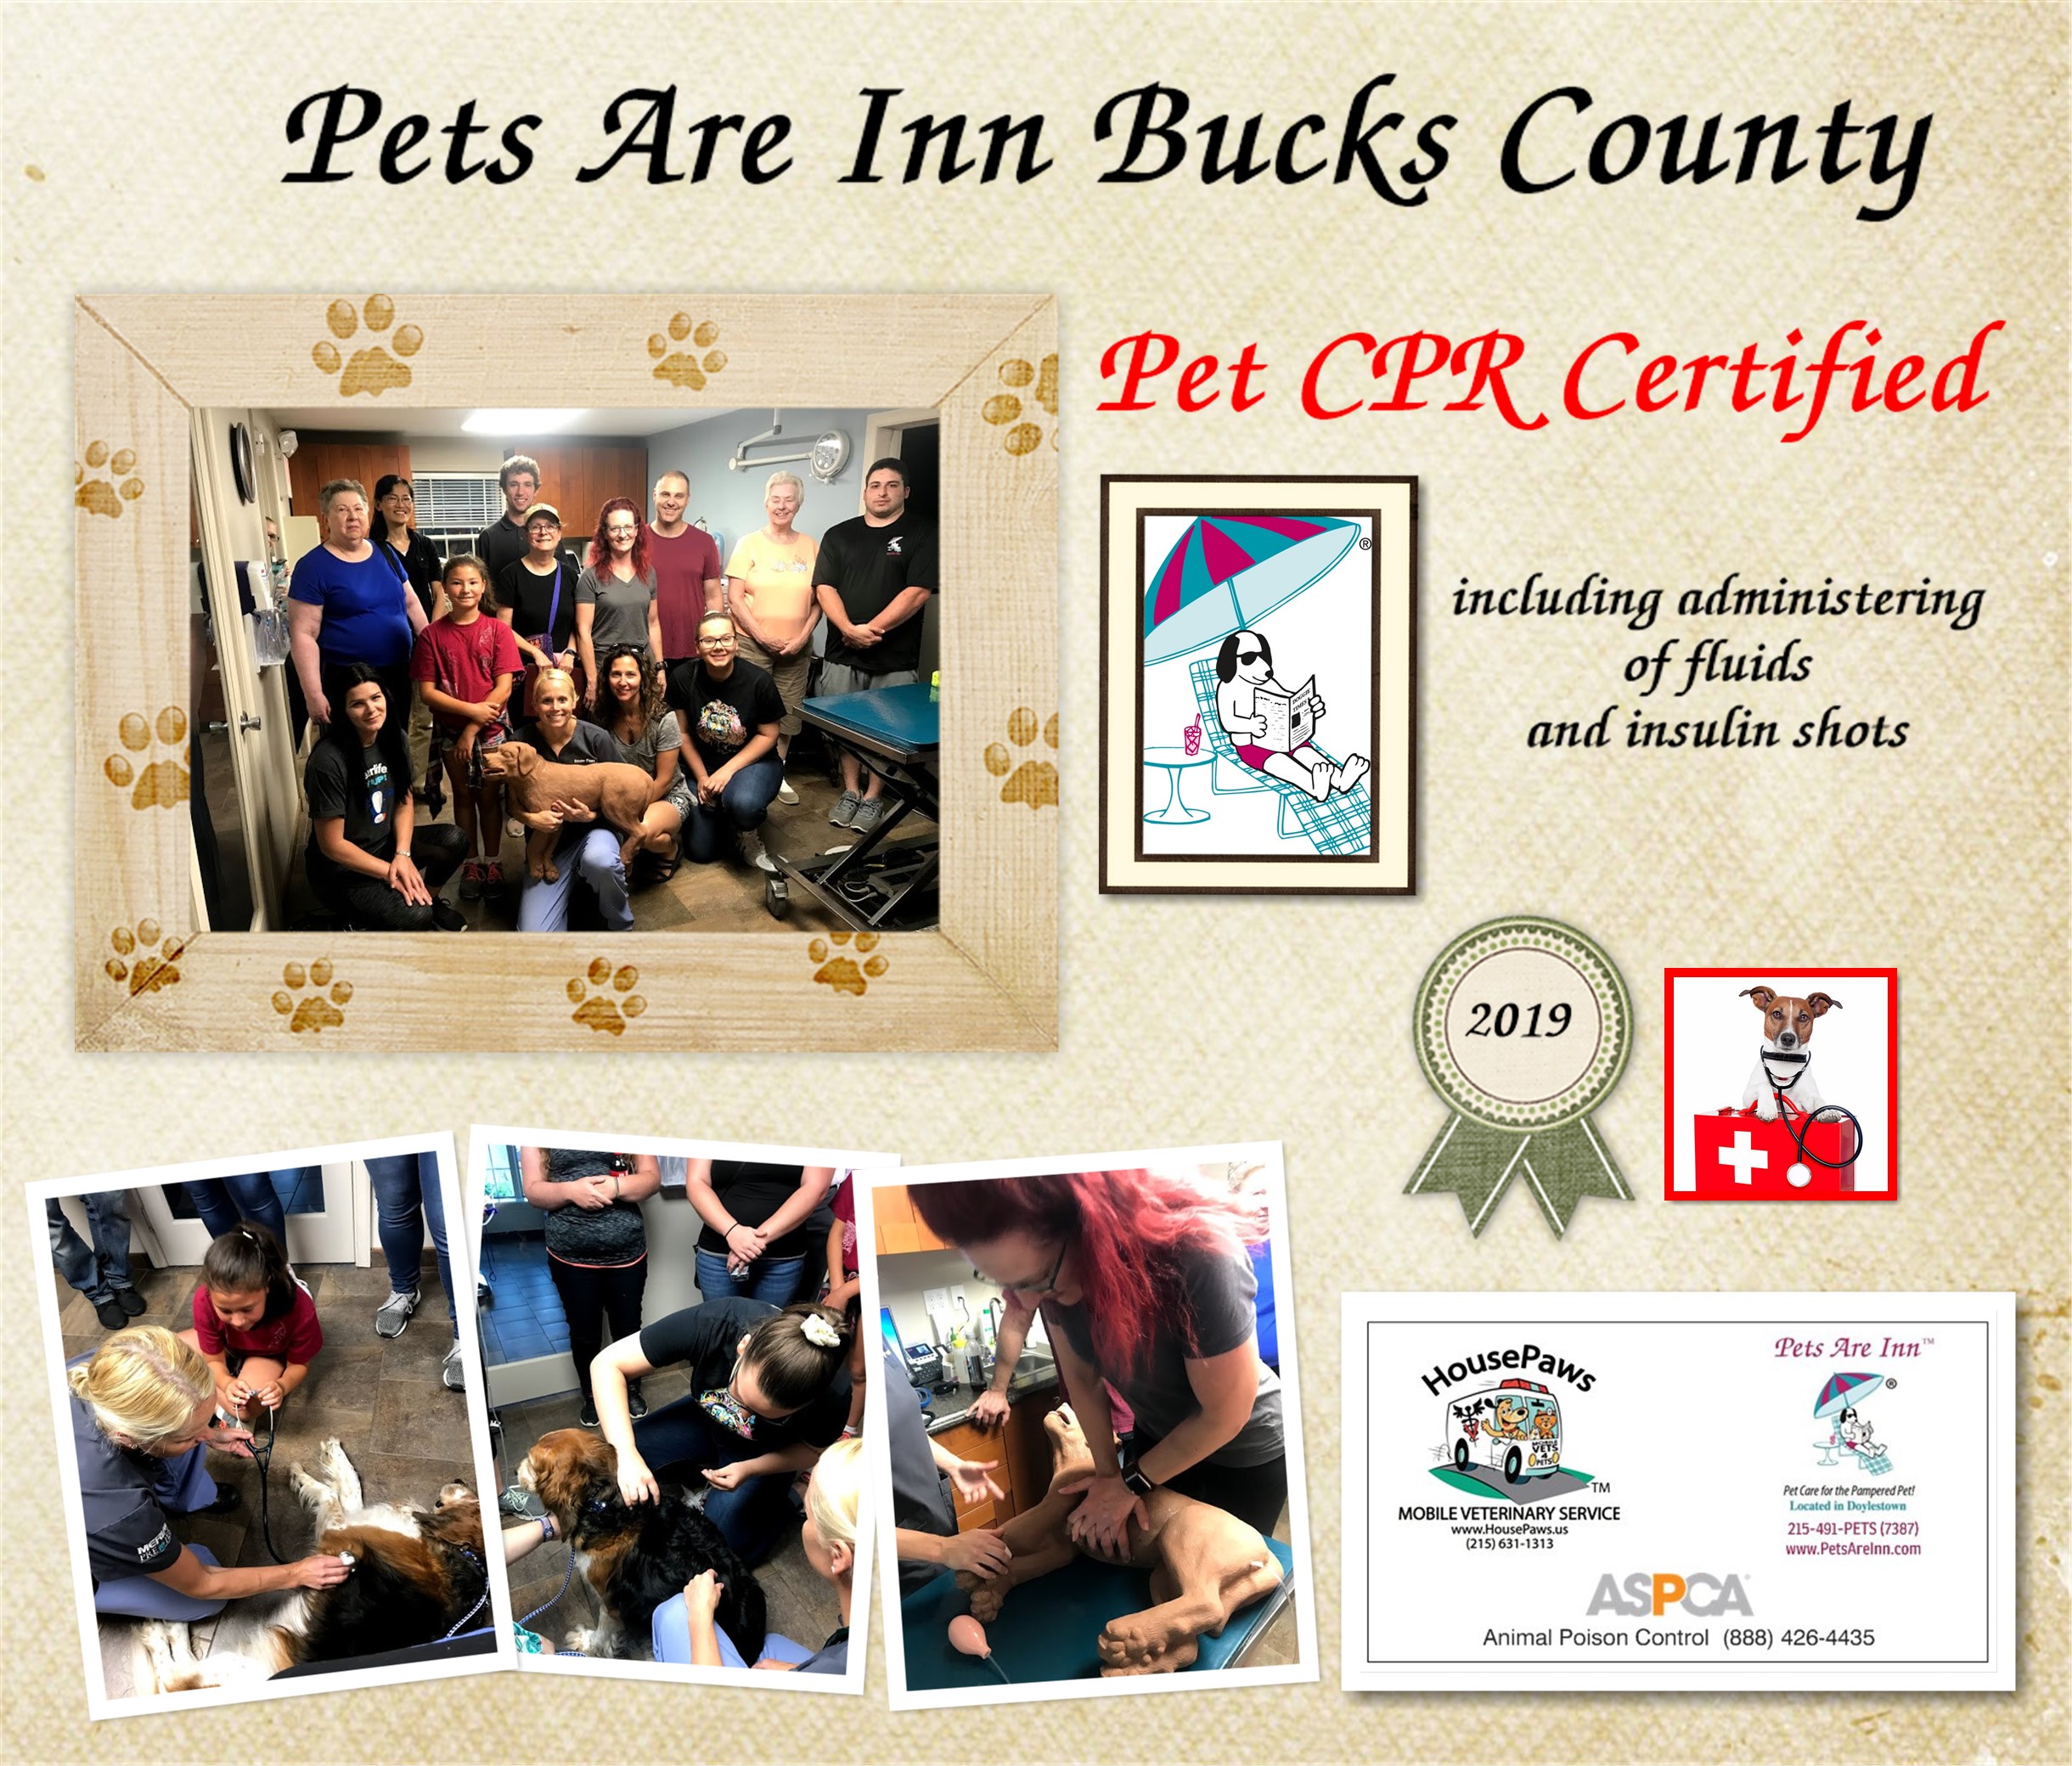 Pets Are Inn Bucks County is proud to be  Pet  CPR certified including administering of fluids and insulin shots.  PetsAreInn  Dogboarding  BucksCountyPA HousePaws Mobile Veterinary Service